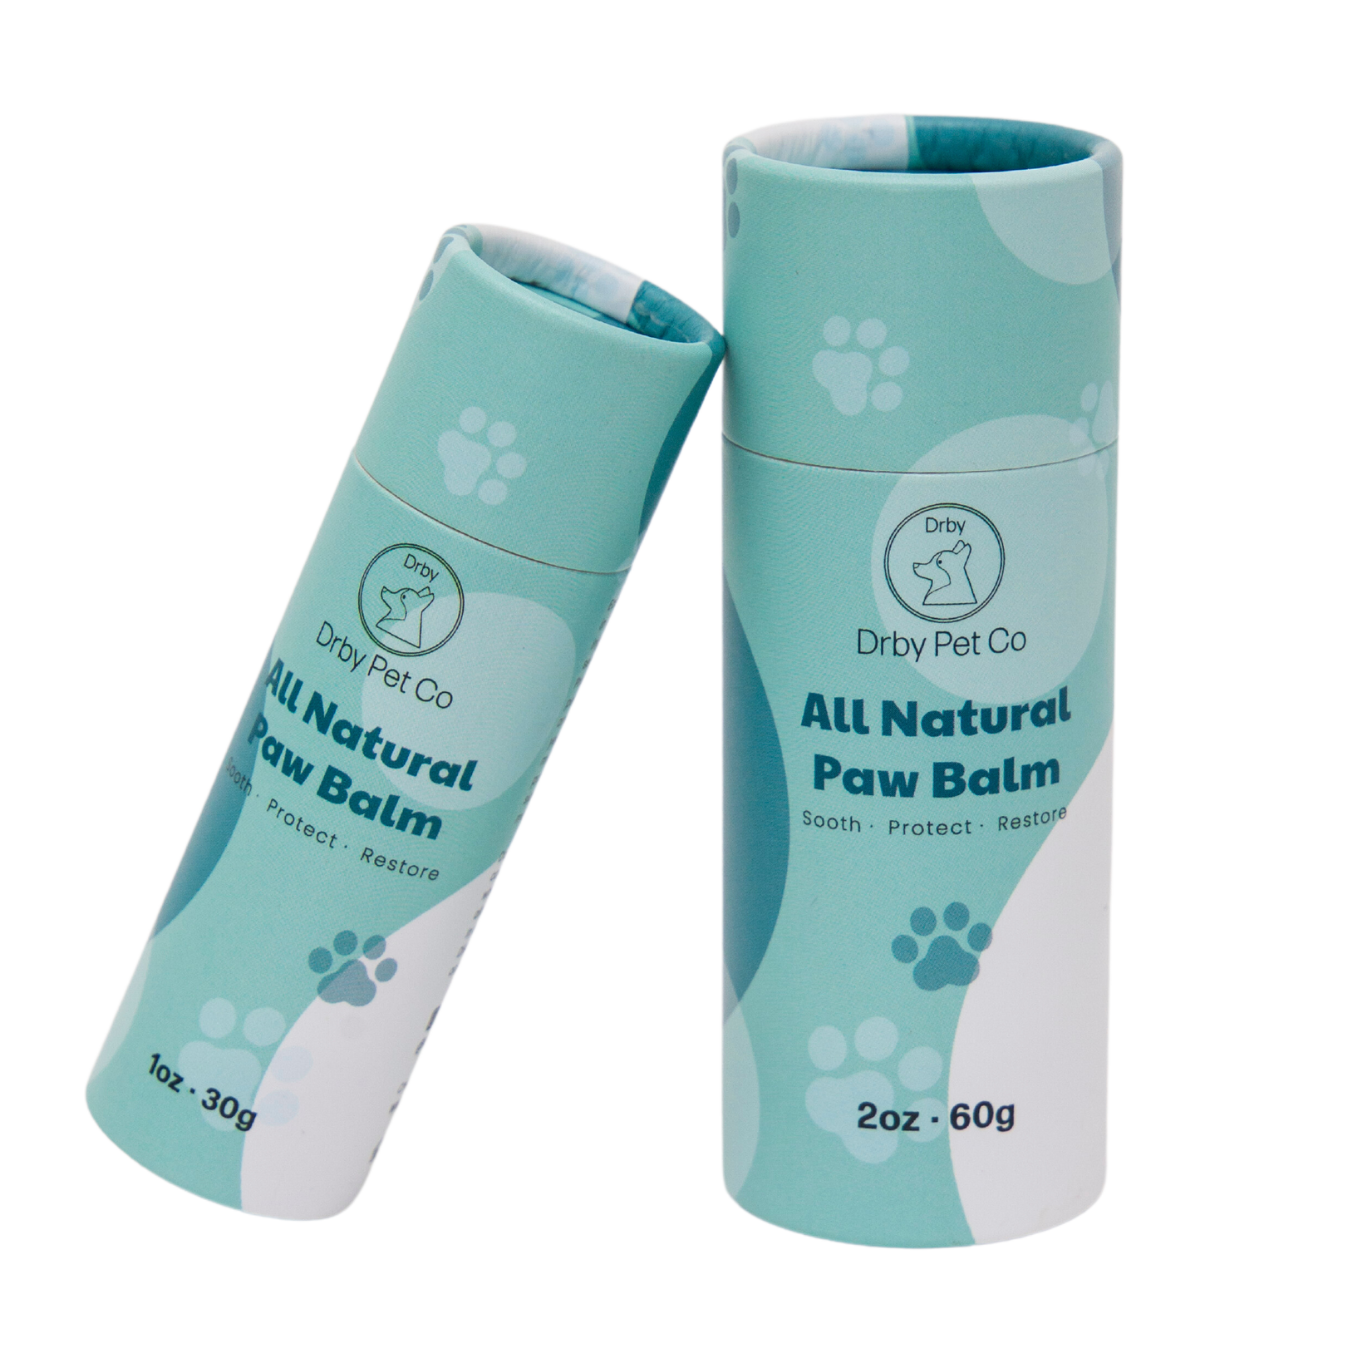 All Natural Paw Balm